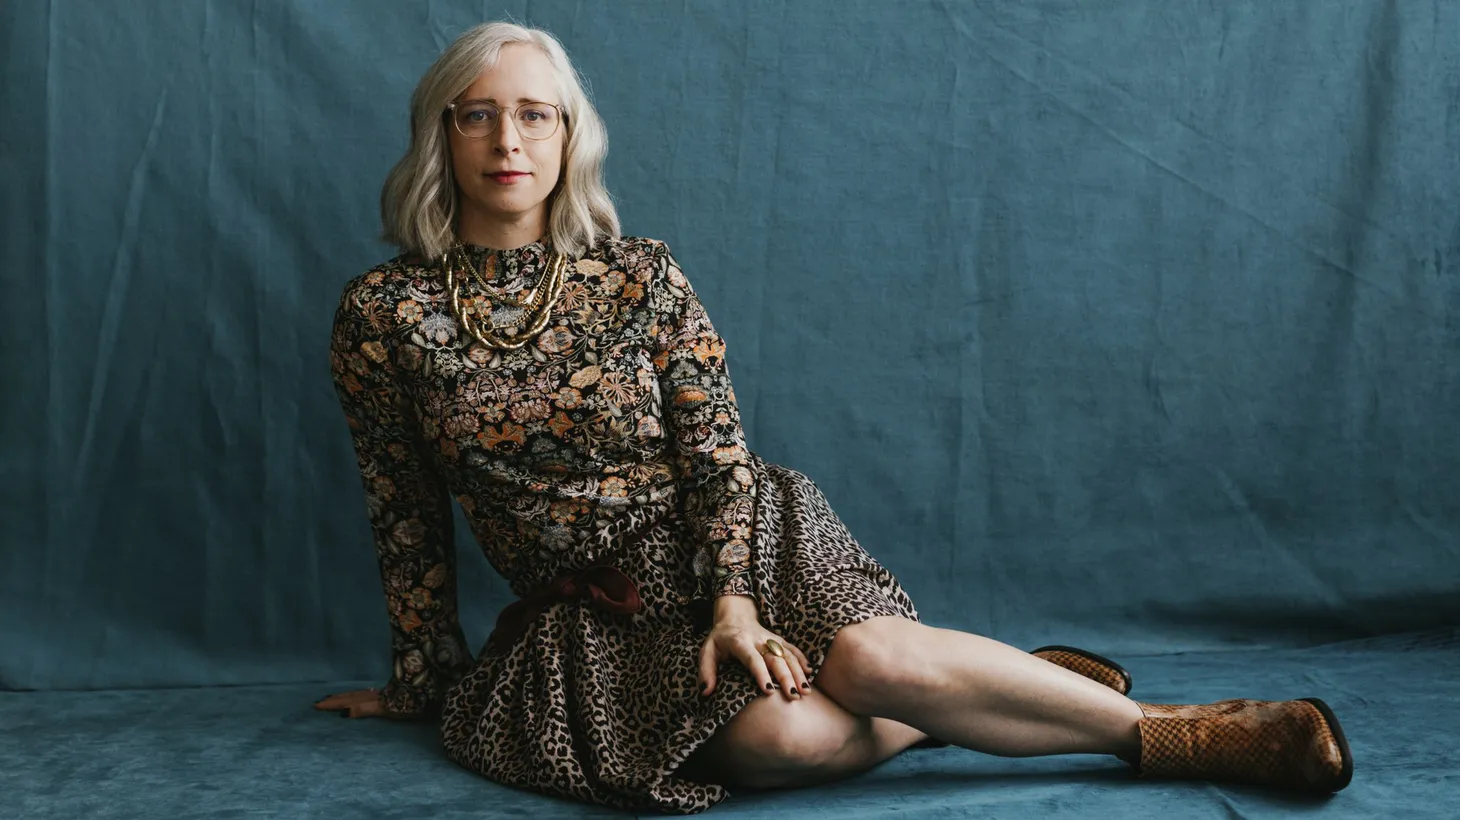 “Found Light” is Laura Veirs’ latest album featuring songs about heartache, parenting, and love.